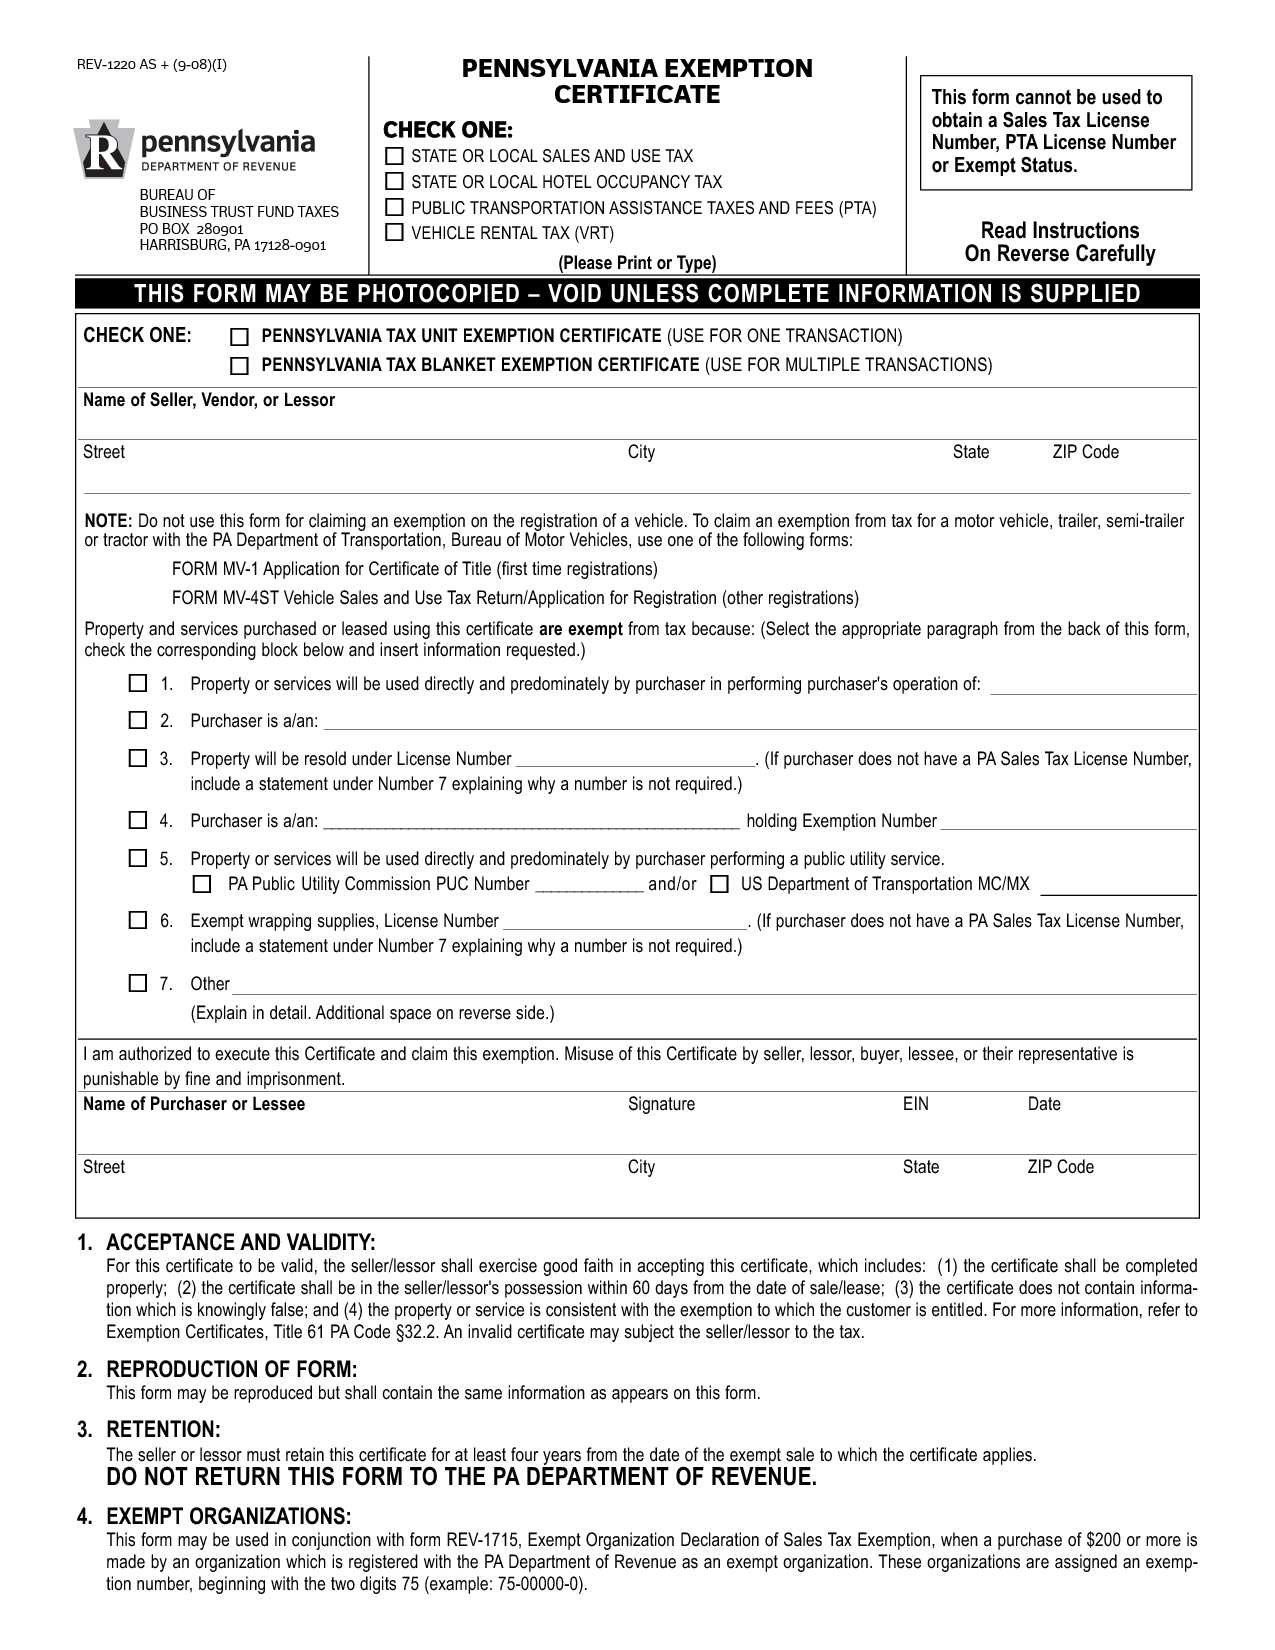 Form 1023 Ez Eligibility Worksheet as Well as Tax Exemption form Check This Article to Download Bank India